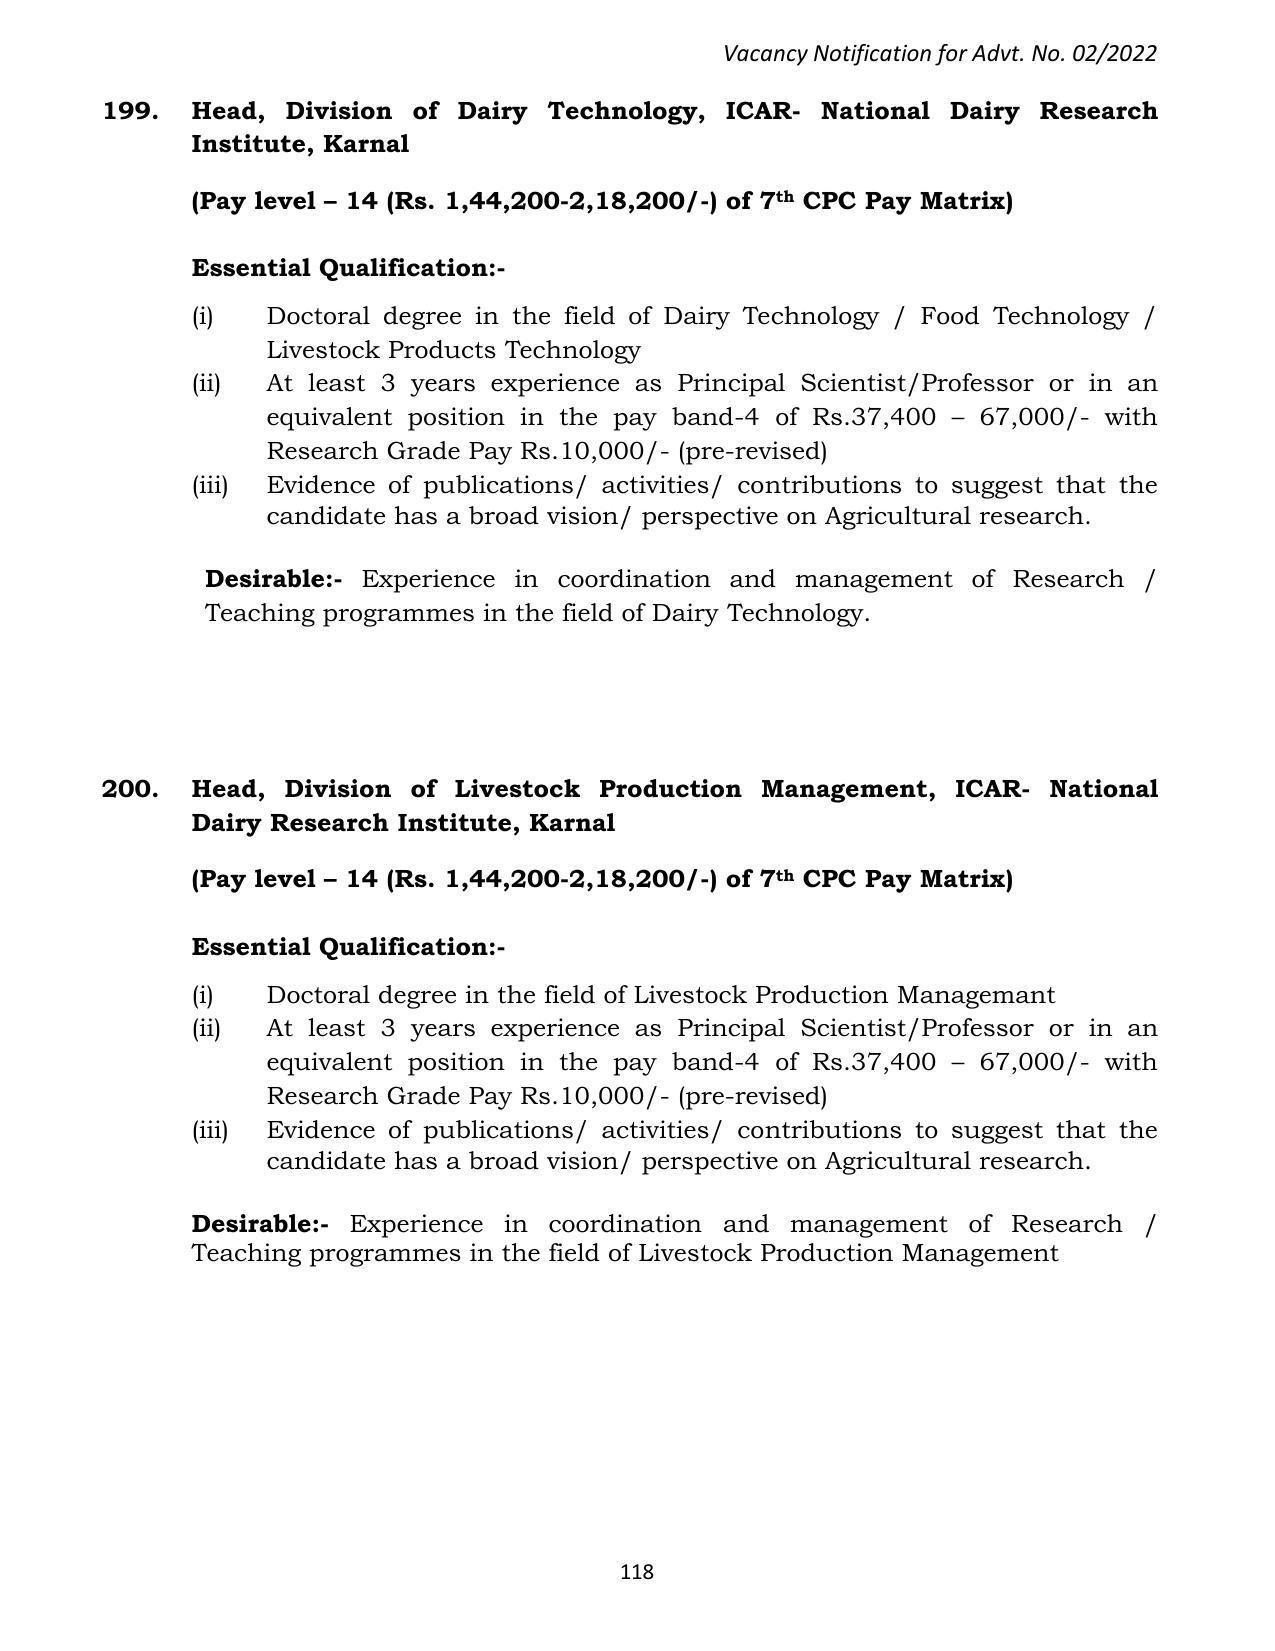 ASRB Non-Research Management Recruitment 2022 - Page 91